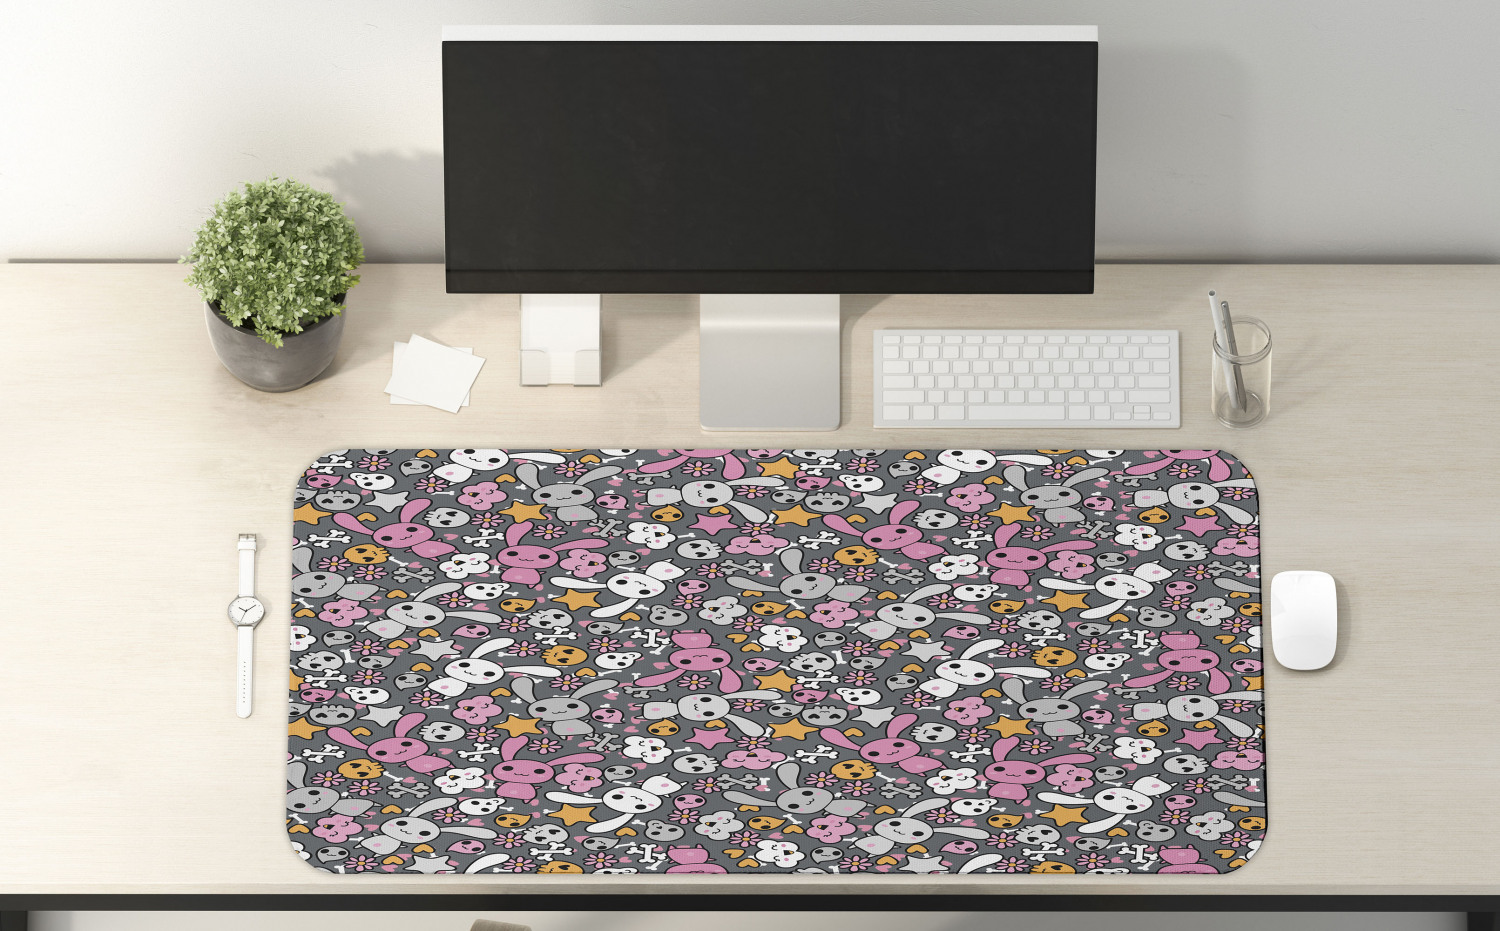 Cartoon Computer Mouse Pad, Kawaii Bunnies and Clouds Heart Eyed Skulls Japanese Anime Design Print, Rectangle Non-Slip Rubber Mousepad X-Large, 35" x 15" Gaming Size, Multicolor, by Ambesonne - image 2 of 2